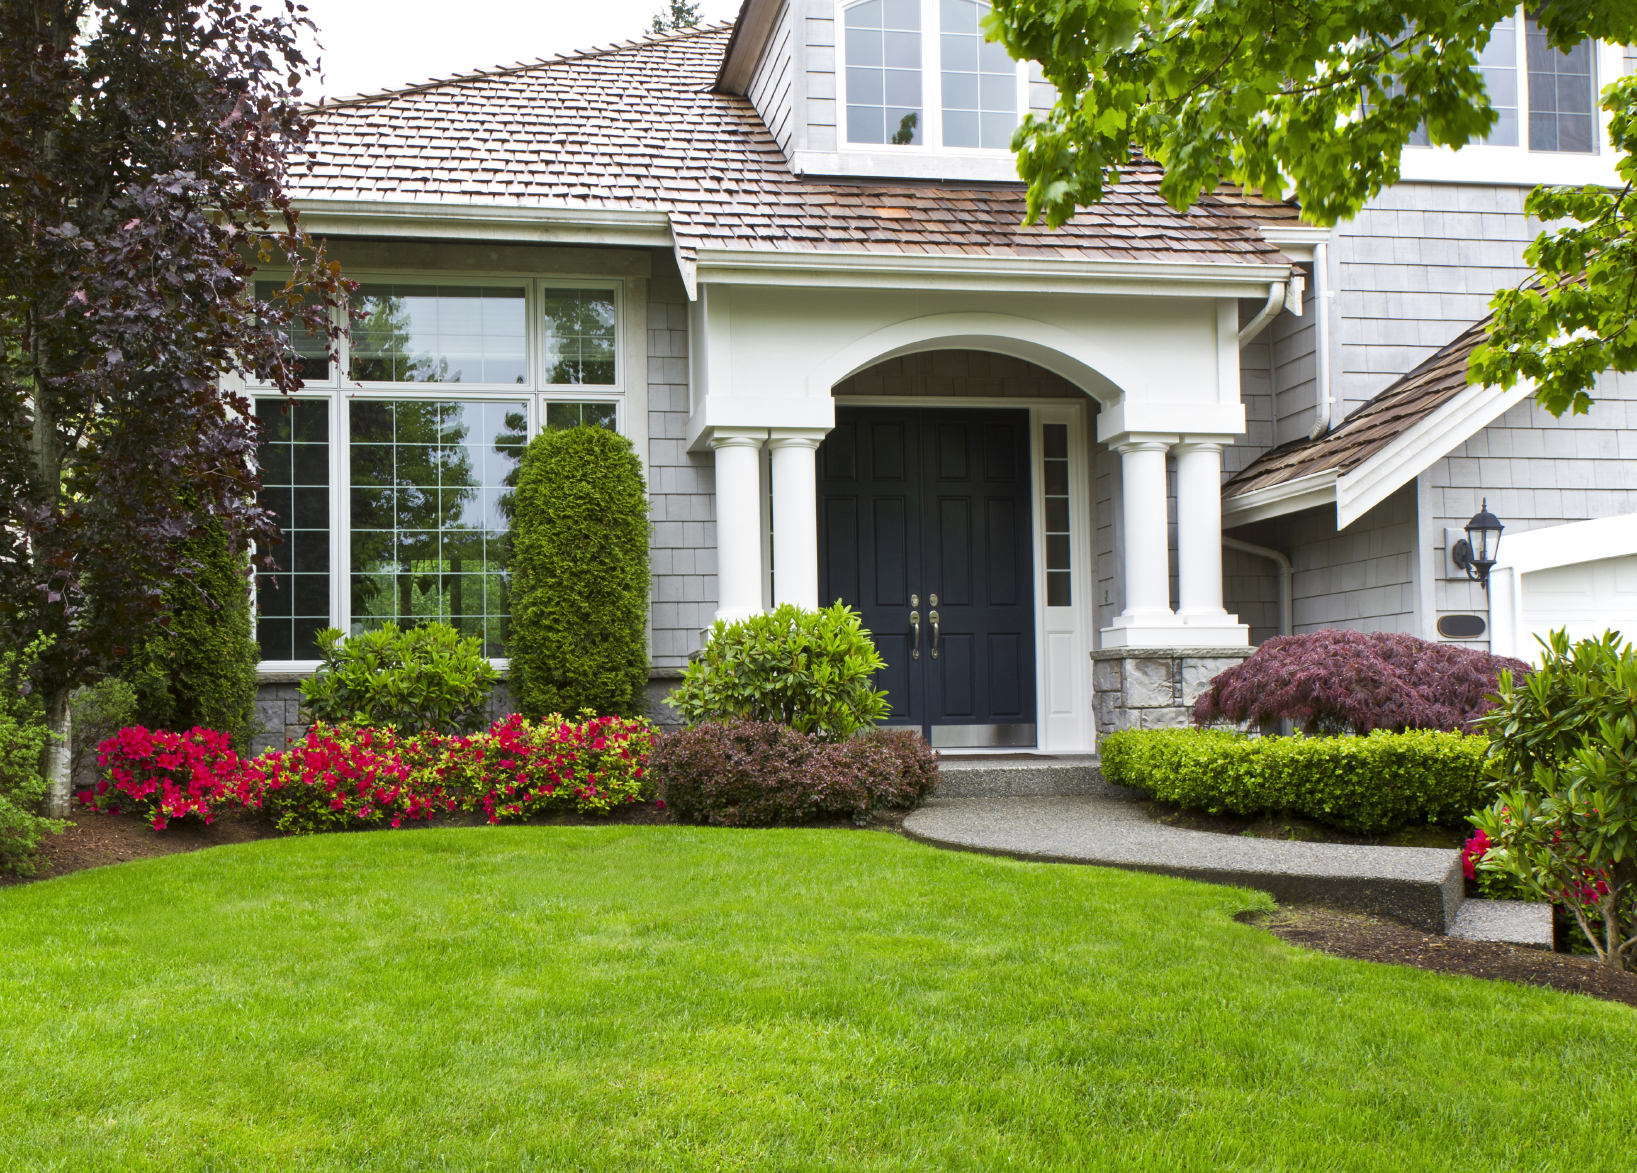 What Are The Differences Between Artificial And Natural Lawns?